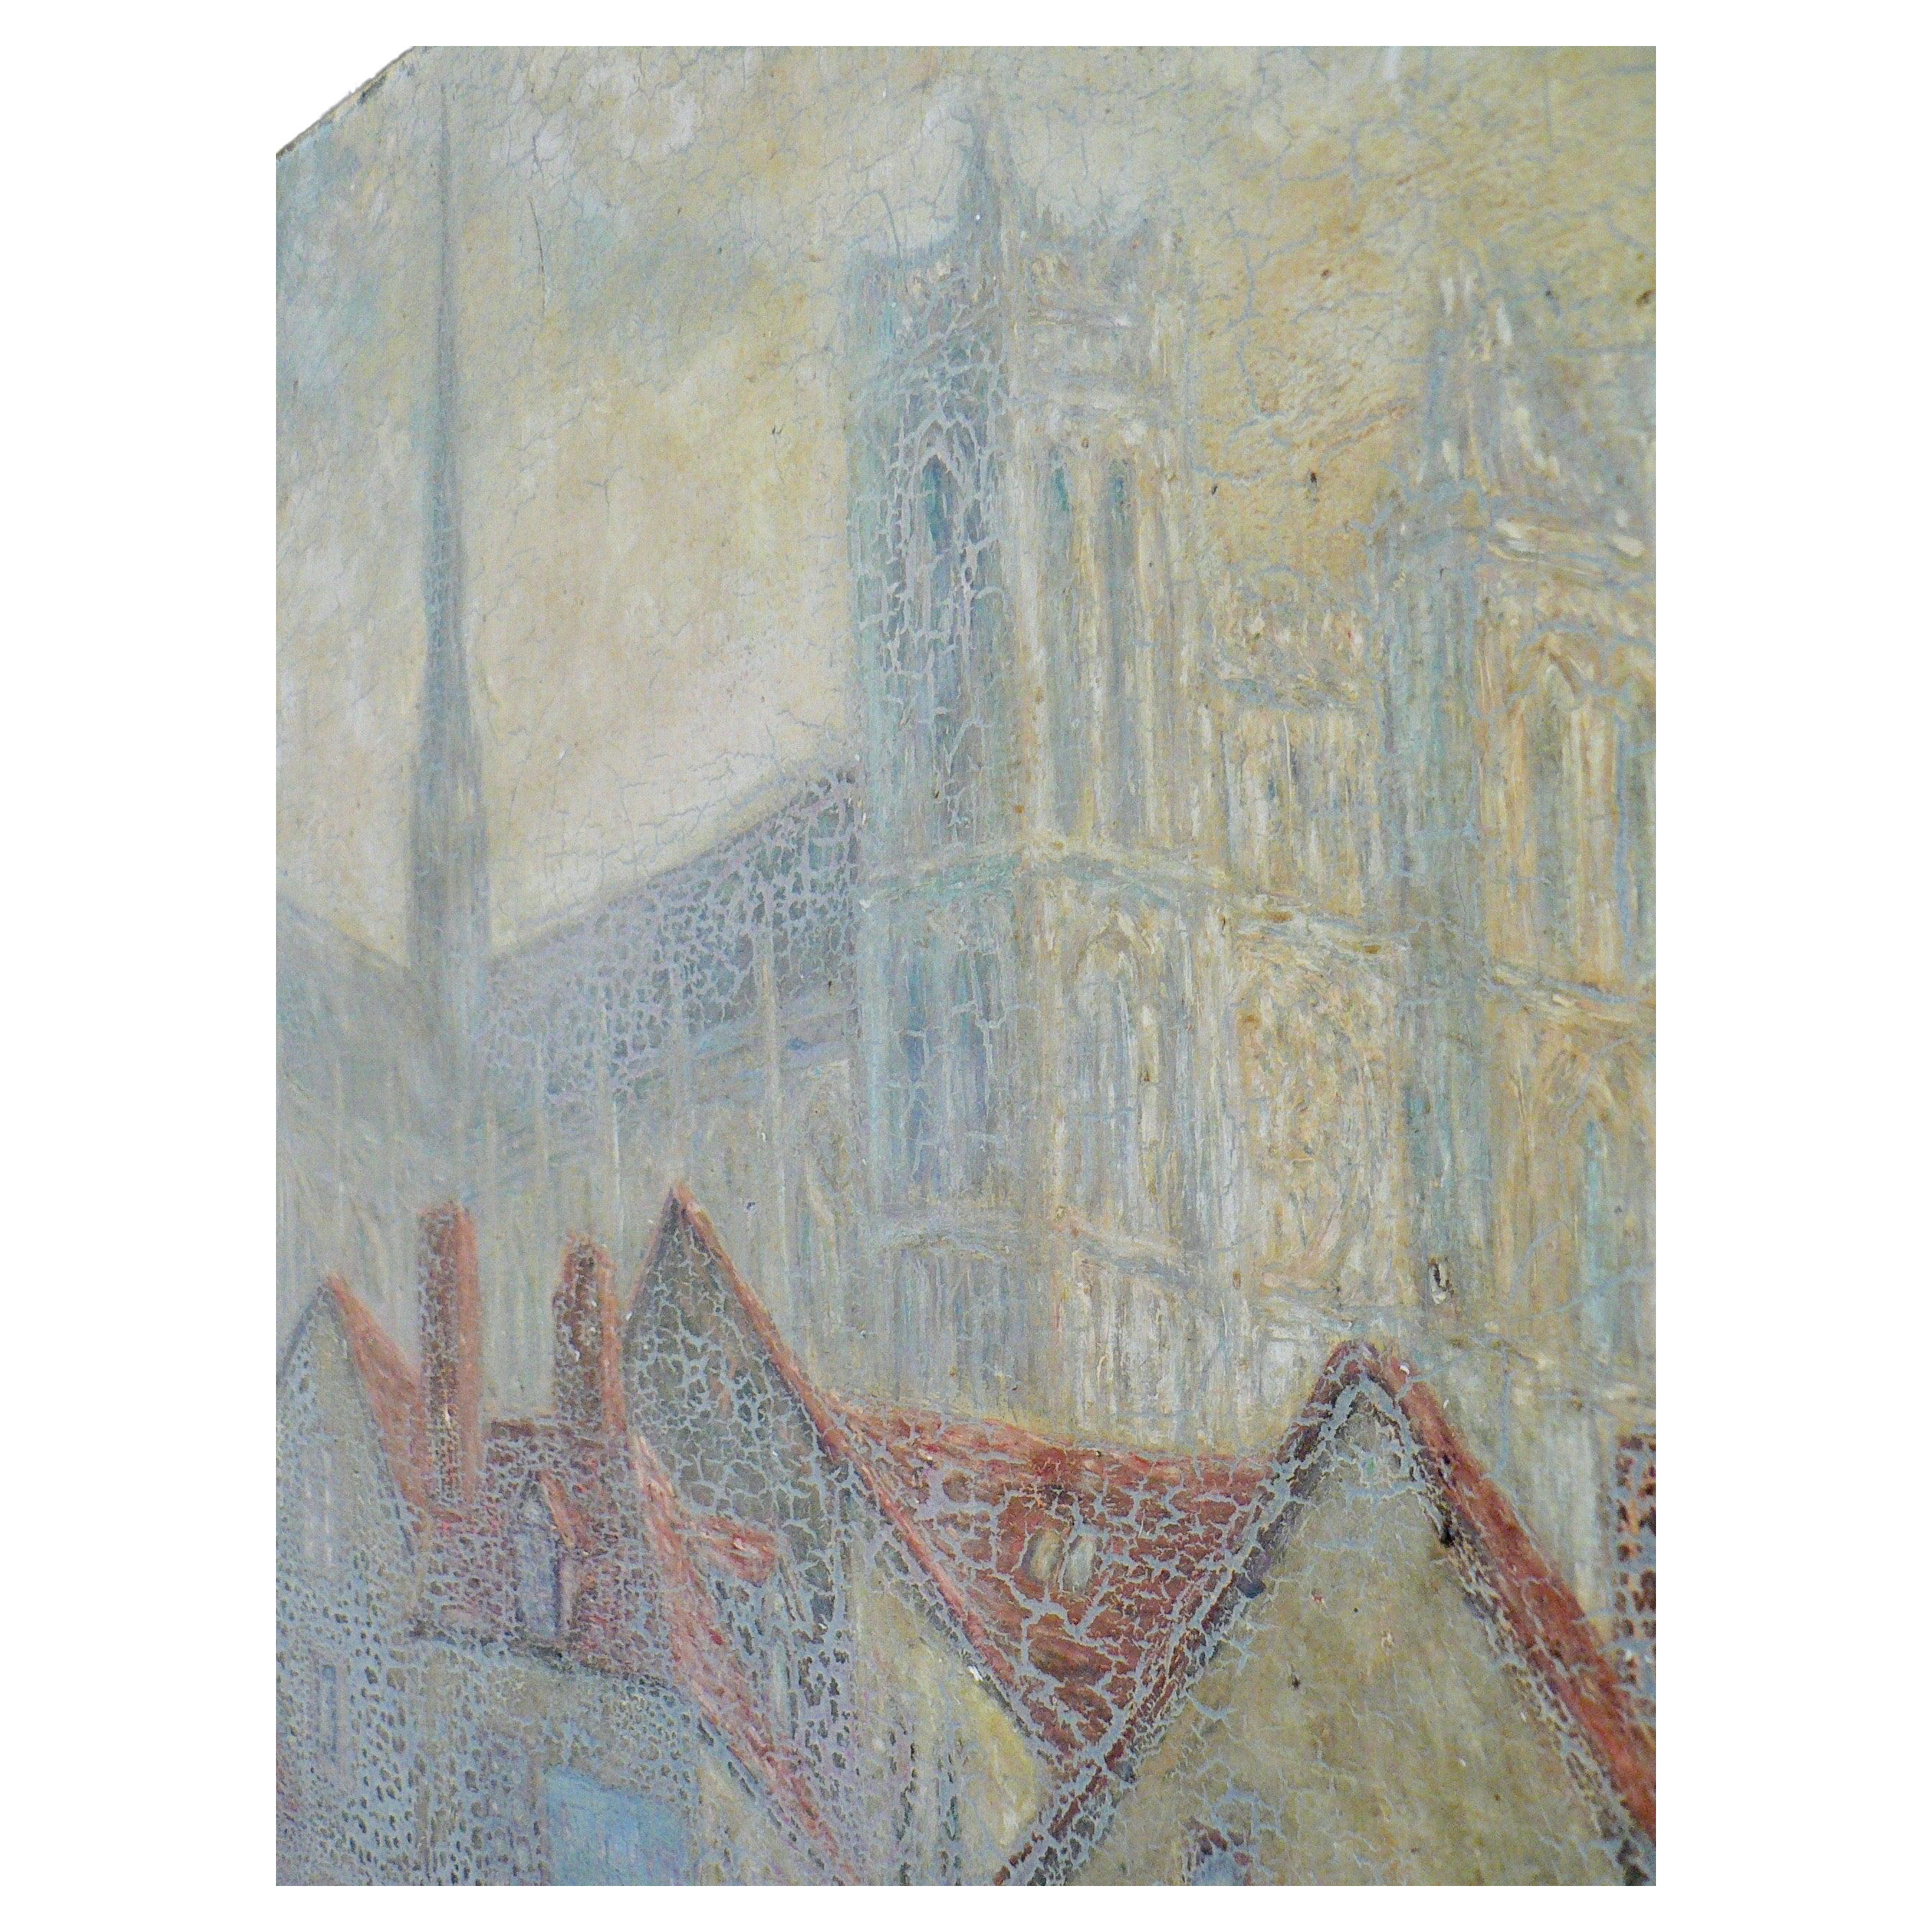 A huge impressionist oil painting on canvas dating back to 1939. Capturing the grandeur of Amiens Cathedral viewed from Pont Piperesse, this masterpiece offers a picturesque scene of French daily life.

Enhanced by decades spent tucked away in an